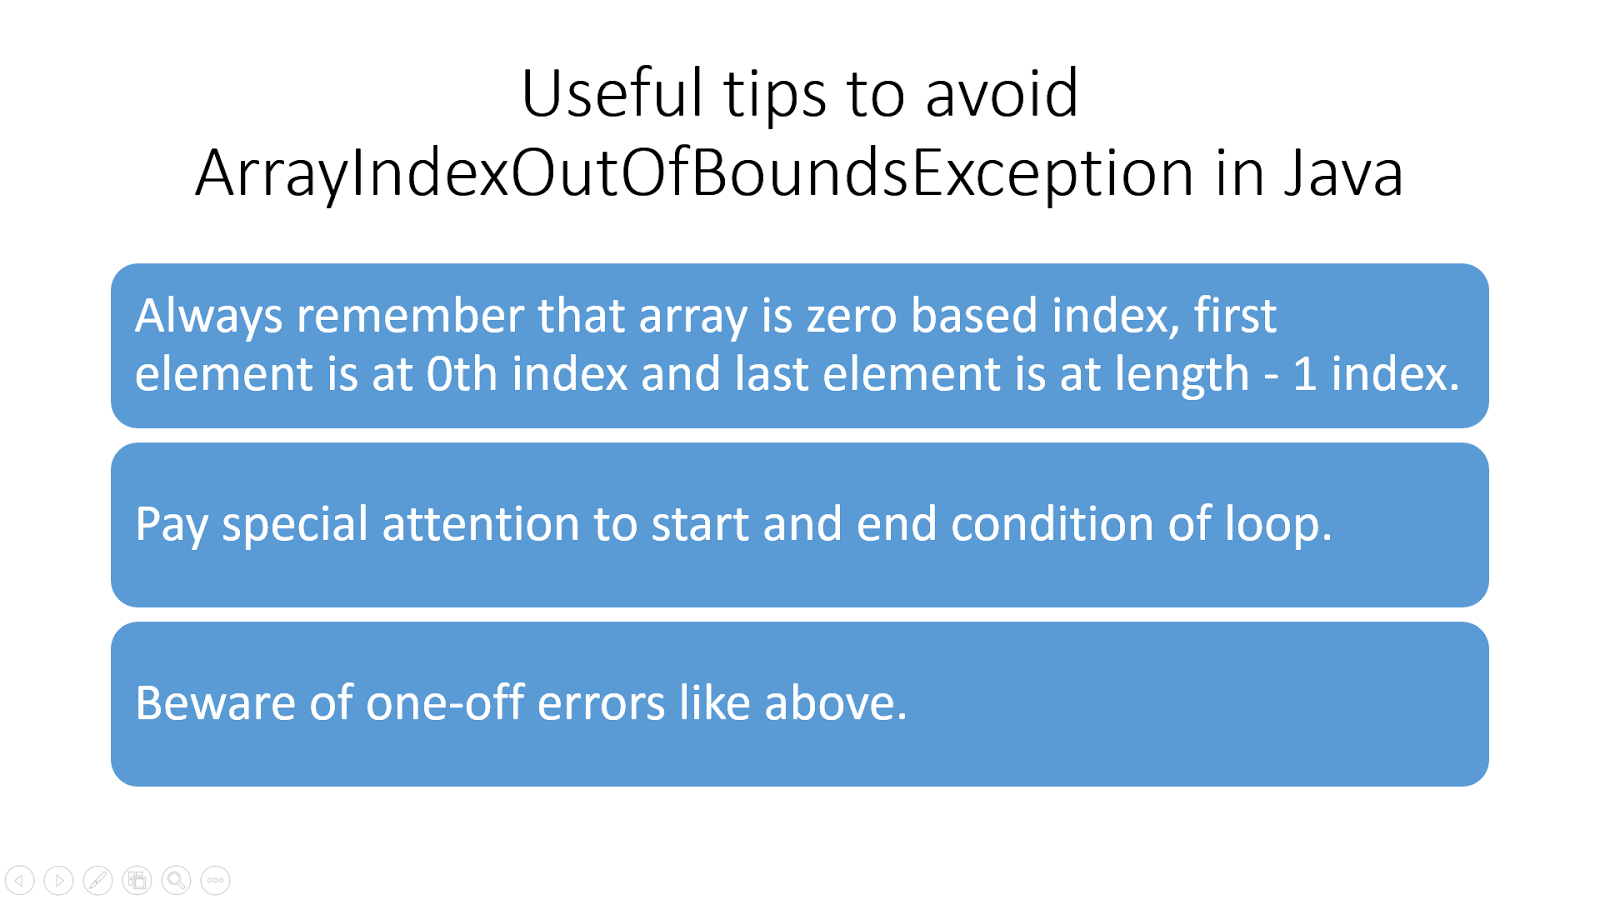 Out of bounds for length java. ARRAYINDEXOUTOFBOUNDSEXCEPTION. ARRAYINDEXOUTOFBOUNDSEXCEPTION иерархия исключений. Exception in thread "main" java.lang.ARRAYINDEXOUTOFBOUNDSEXCEPTION: Index 0 out of bounds for length 0. Java.lang.ARRAYINDEXOUTOFBOUNDSEXCEPTION: length=0; Index=0.